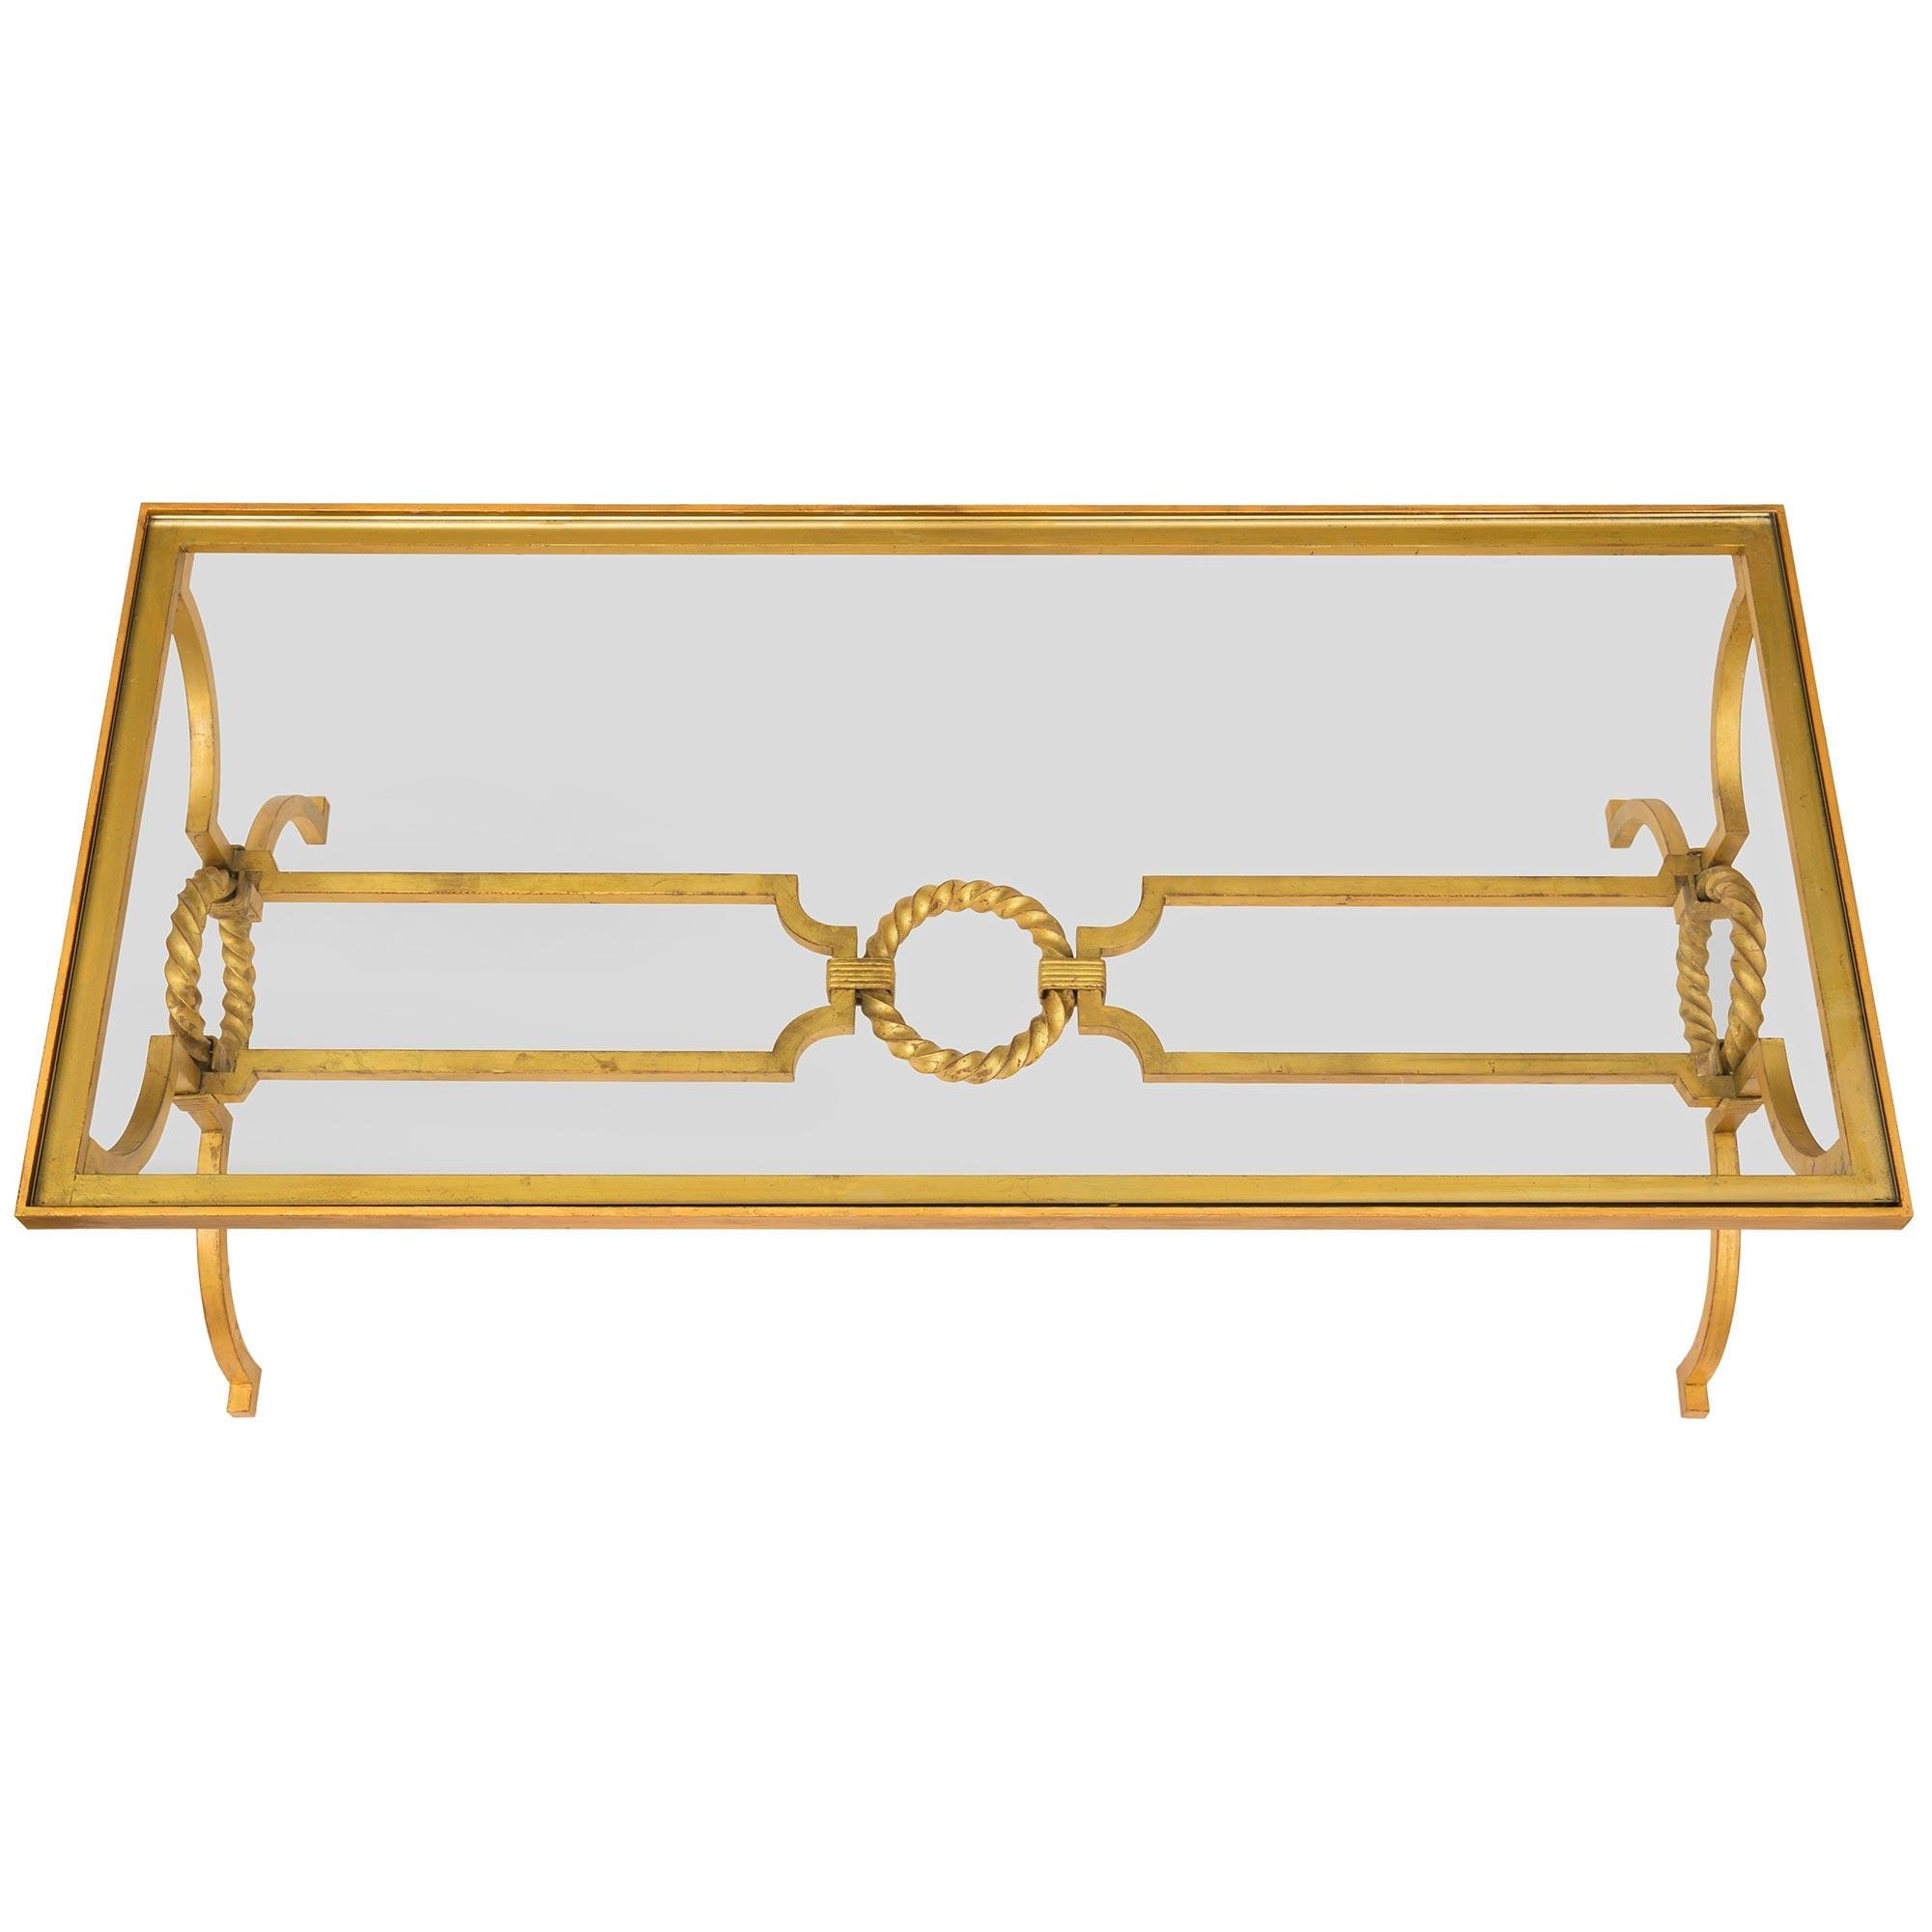 An elegant French late 19th century Louis XVI st. gilt iron and glass coffee table. The table is raised by lovely curved square supports with a superb and most decorative twisted wreath design at each side. The supports are connected by a beautiful